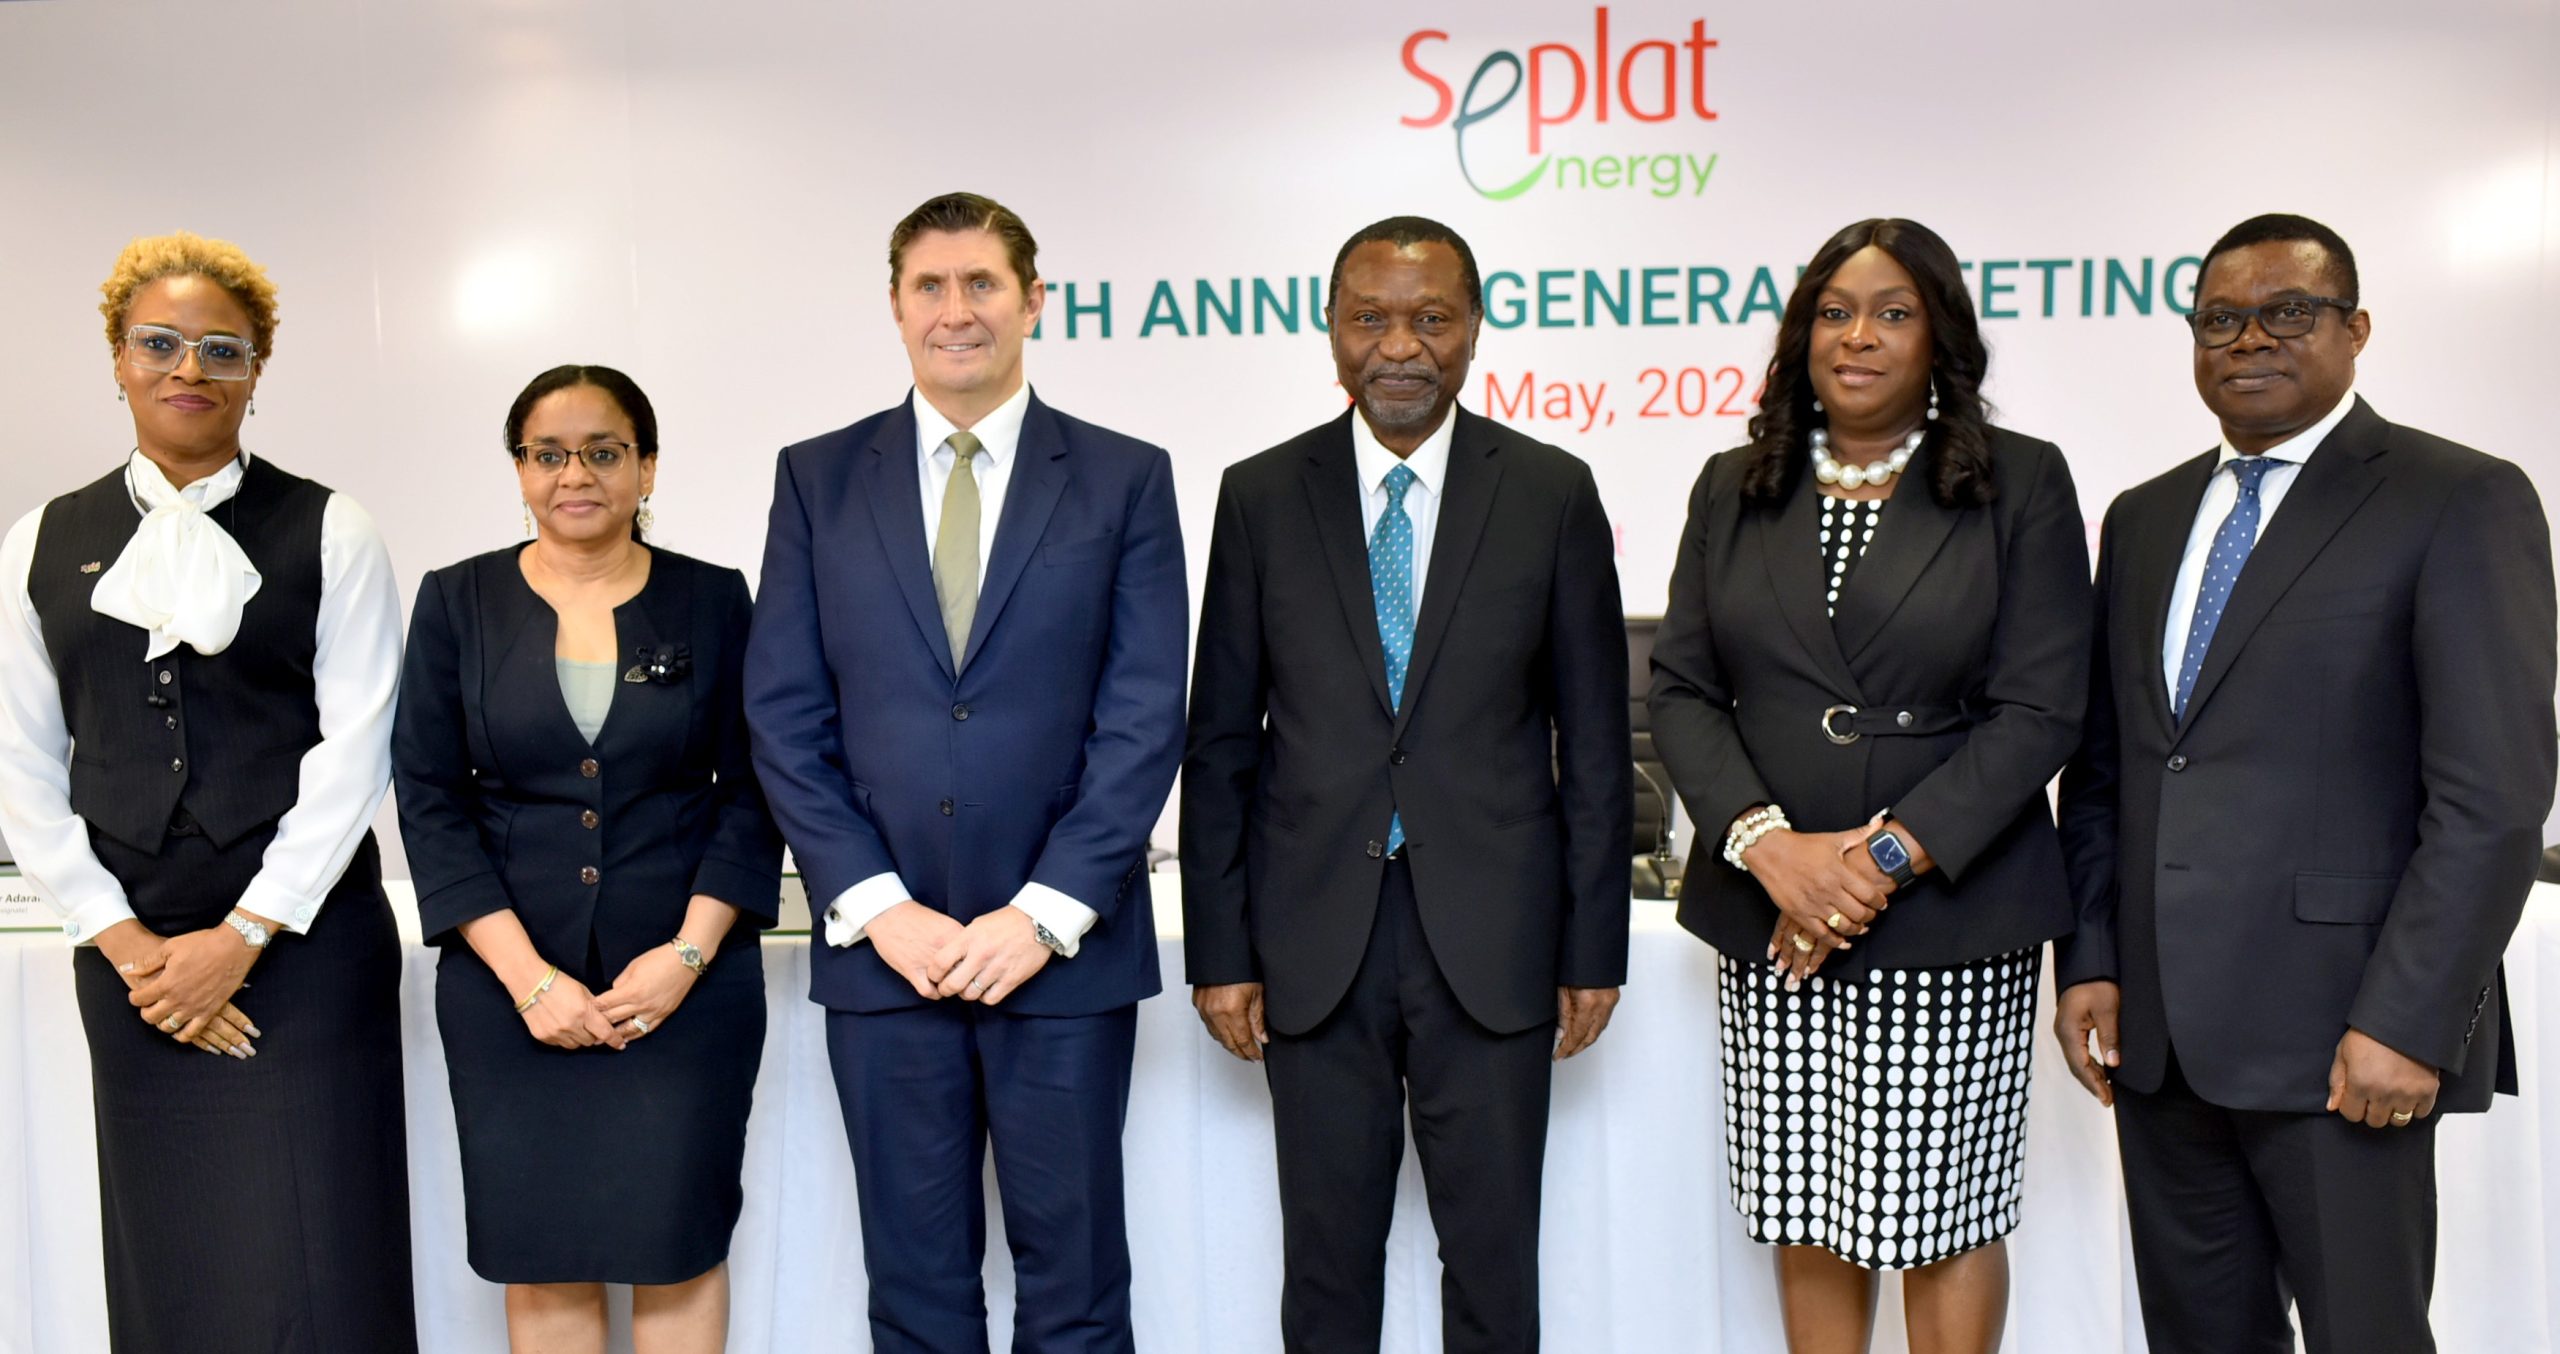 Seplat Energy recommits to growing shareholders wealth, sustainability at AGM